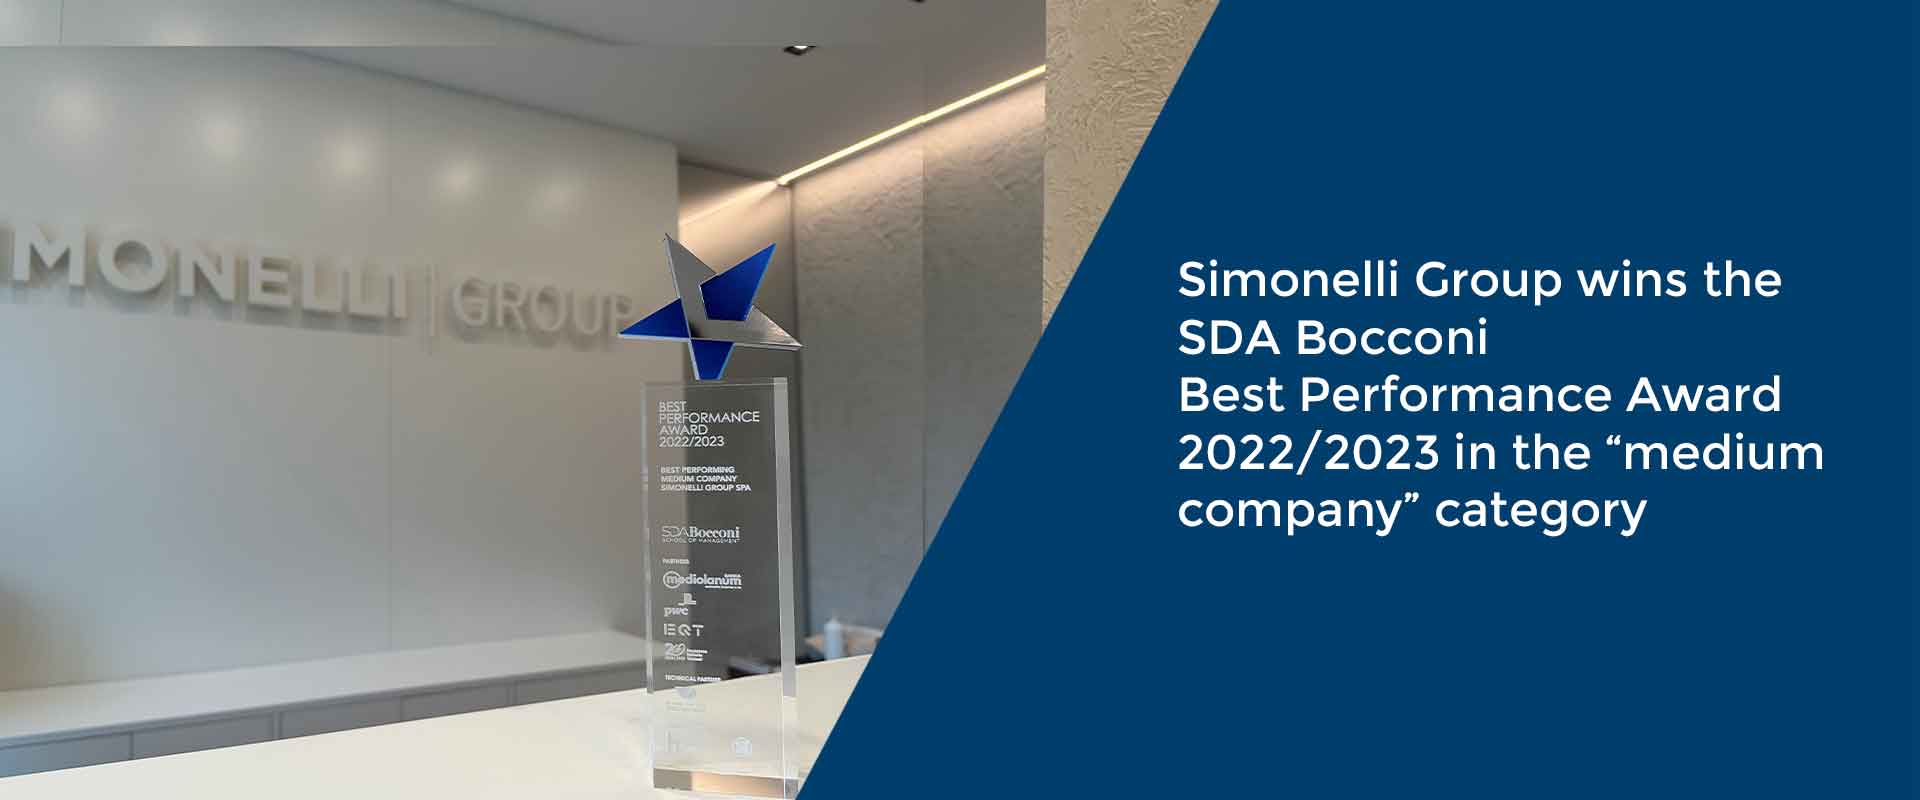 Simonelli Group wins the SDA Bocconi Best Performance Award 2022/2023 in the “medium company” category